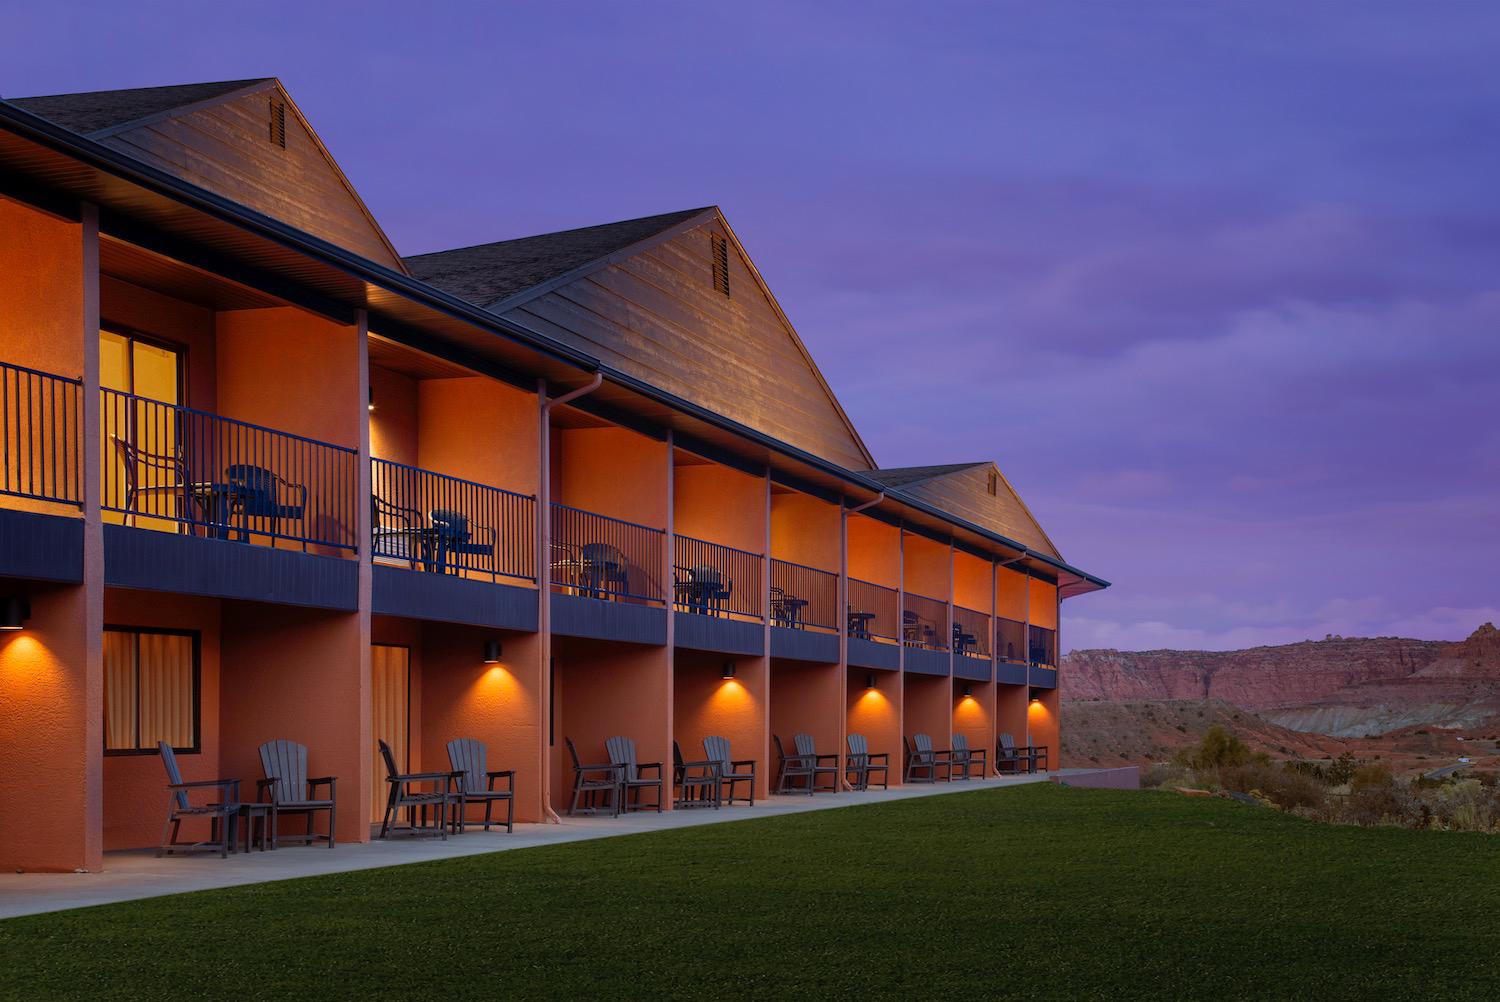 Located just one mile from the entrance of Capitol Reef National Park, our Torrey, Utah Hotel treats you to an immersive glamping experience. Our unique lodging options consist of Conestoga Wagons, Teepees, and stand-alone Cabins encapsulating an unconventional charm. For guests desiring a traditional hotel stay, we also provide a range of suites and guest rooms.
Situated on 58-acres, our hotel allows you to soak in spectacular views of the surrounding red rock cliffs. Rejuvenate in our hot tub or the seasonal outdoor heated pool. For adventure seekers, we offer exciting activities like hiking alongside pack llamas, awe-inspiring horseback rides, and thrilling jeep safaris.
With amenities such as an on-site restaurant, complimentary WiFi, fitness center, gift shop, and guest laundry facility, we go the extra mile to ensure a comfortable and enjoyable stay for our guests. Capitol Reef Resort provides the ideal lodging experience while exploring Utah’s prestigious Mighty 5 National Parks.